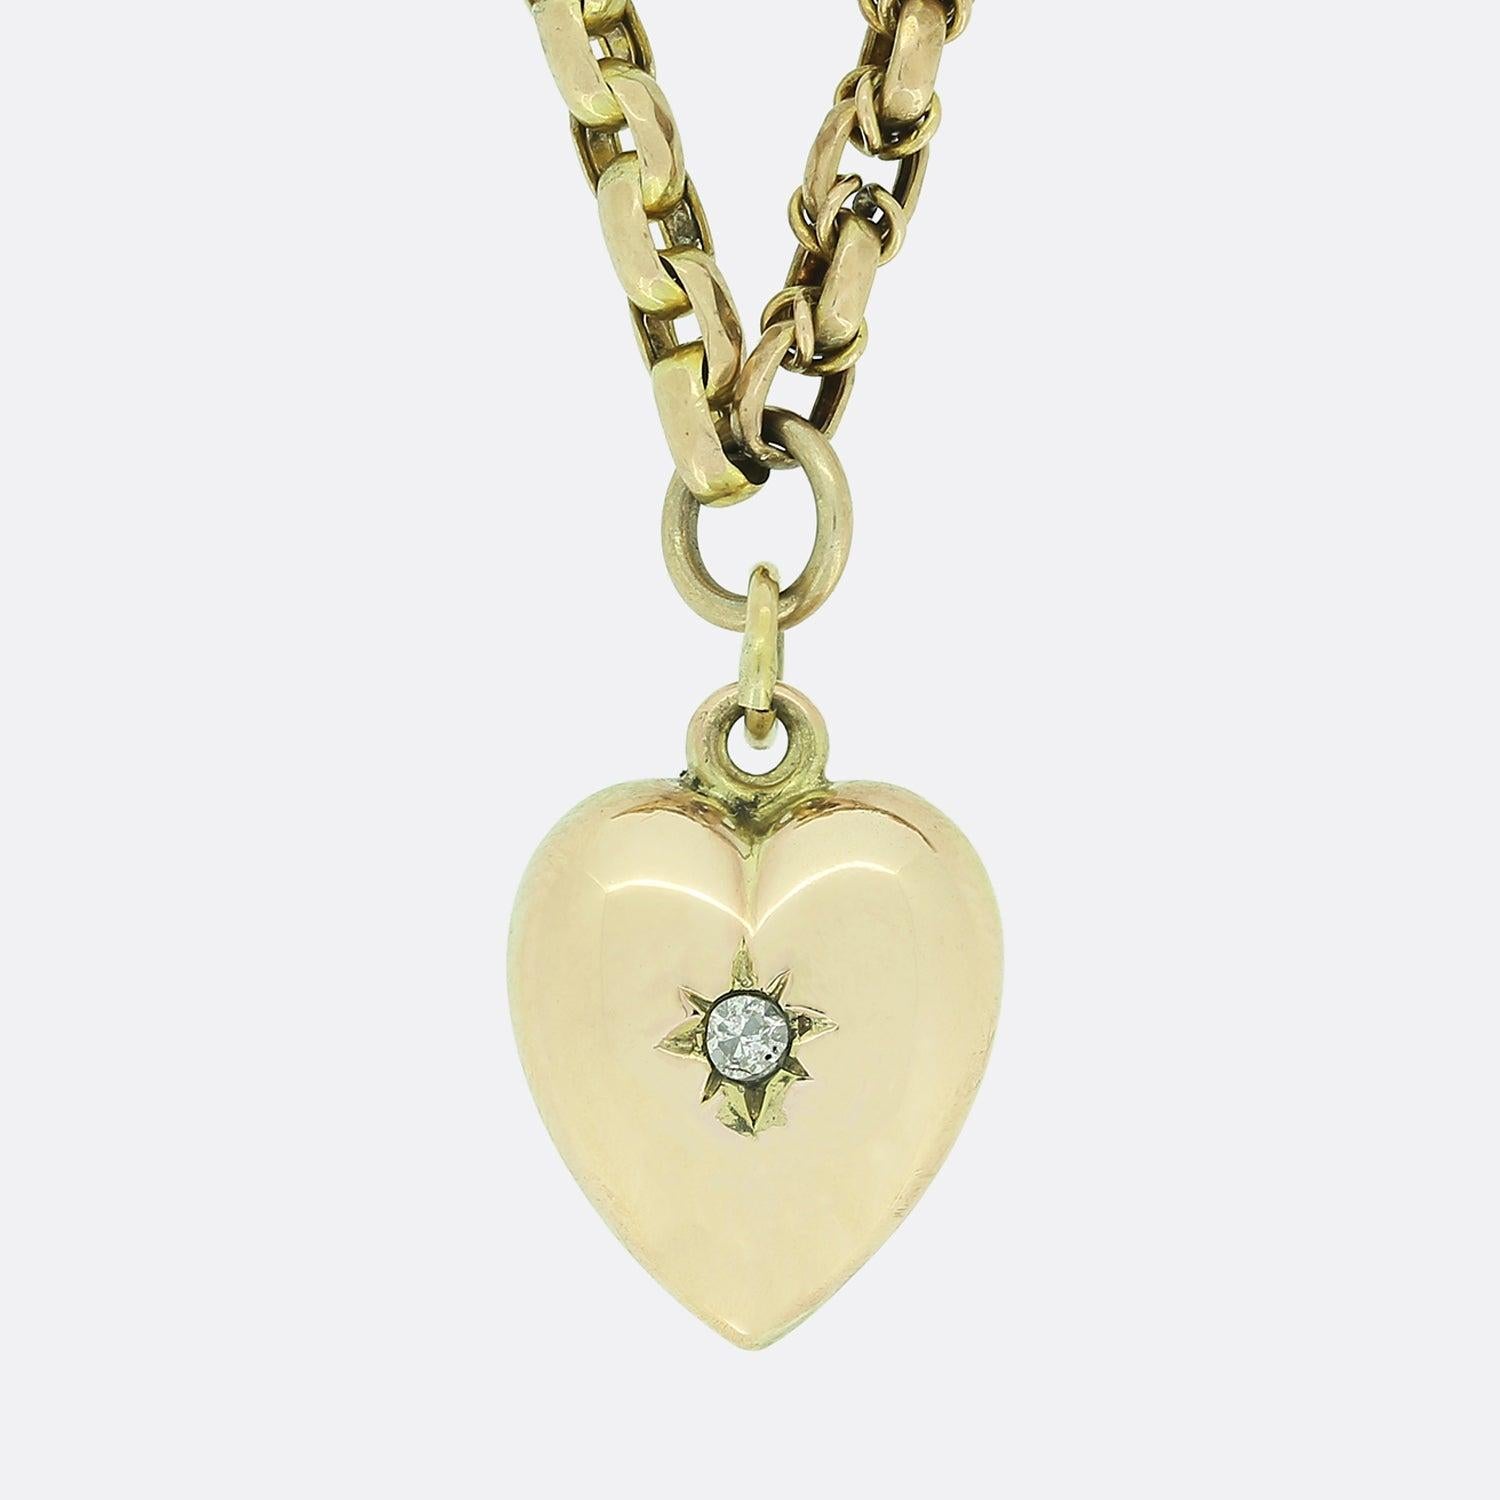 This is a vintage 9ct yellow gold belcher chain charm necklace. The necklace features five heart pendants; all of which have been set with either a diamond, turquoise or a pearl. The necklace is securely attached by an antique swivel clasp.